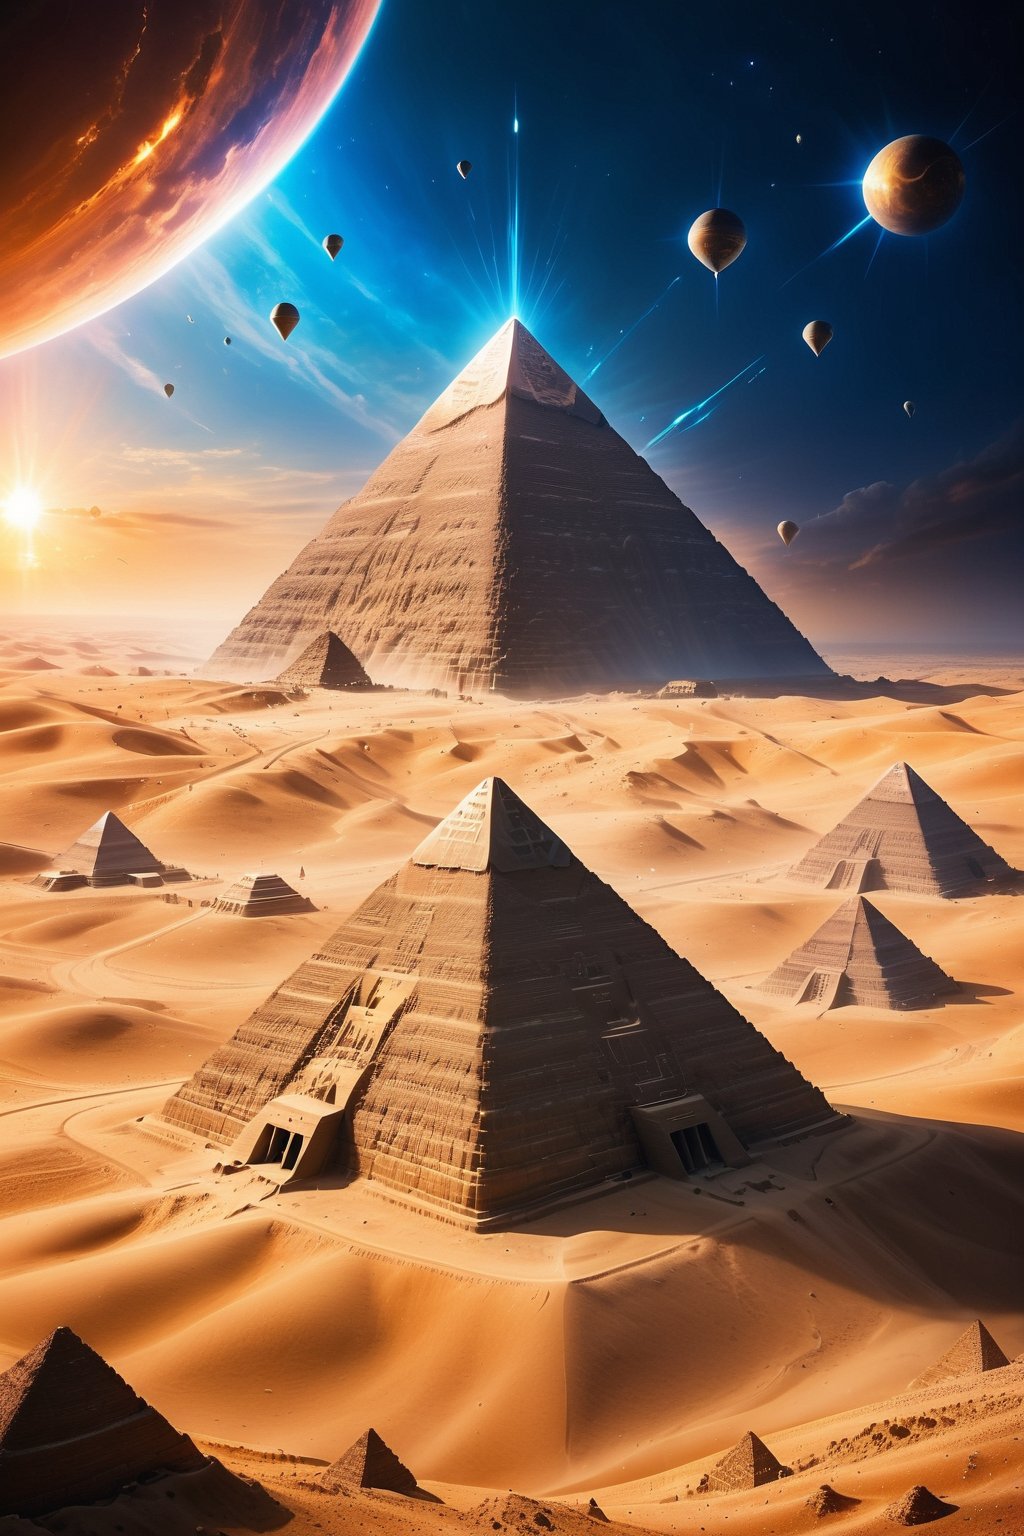 Step into a world where the past and the future collide - witness the enigmatic Egyptian pyramids surrounded by a fleet of UFOs, their advanced technology a stark contrast to the ancient structures.